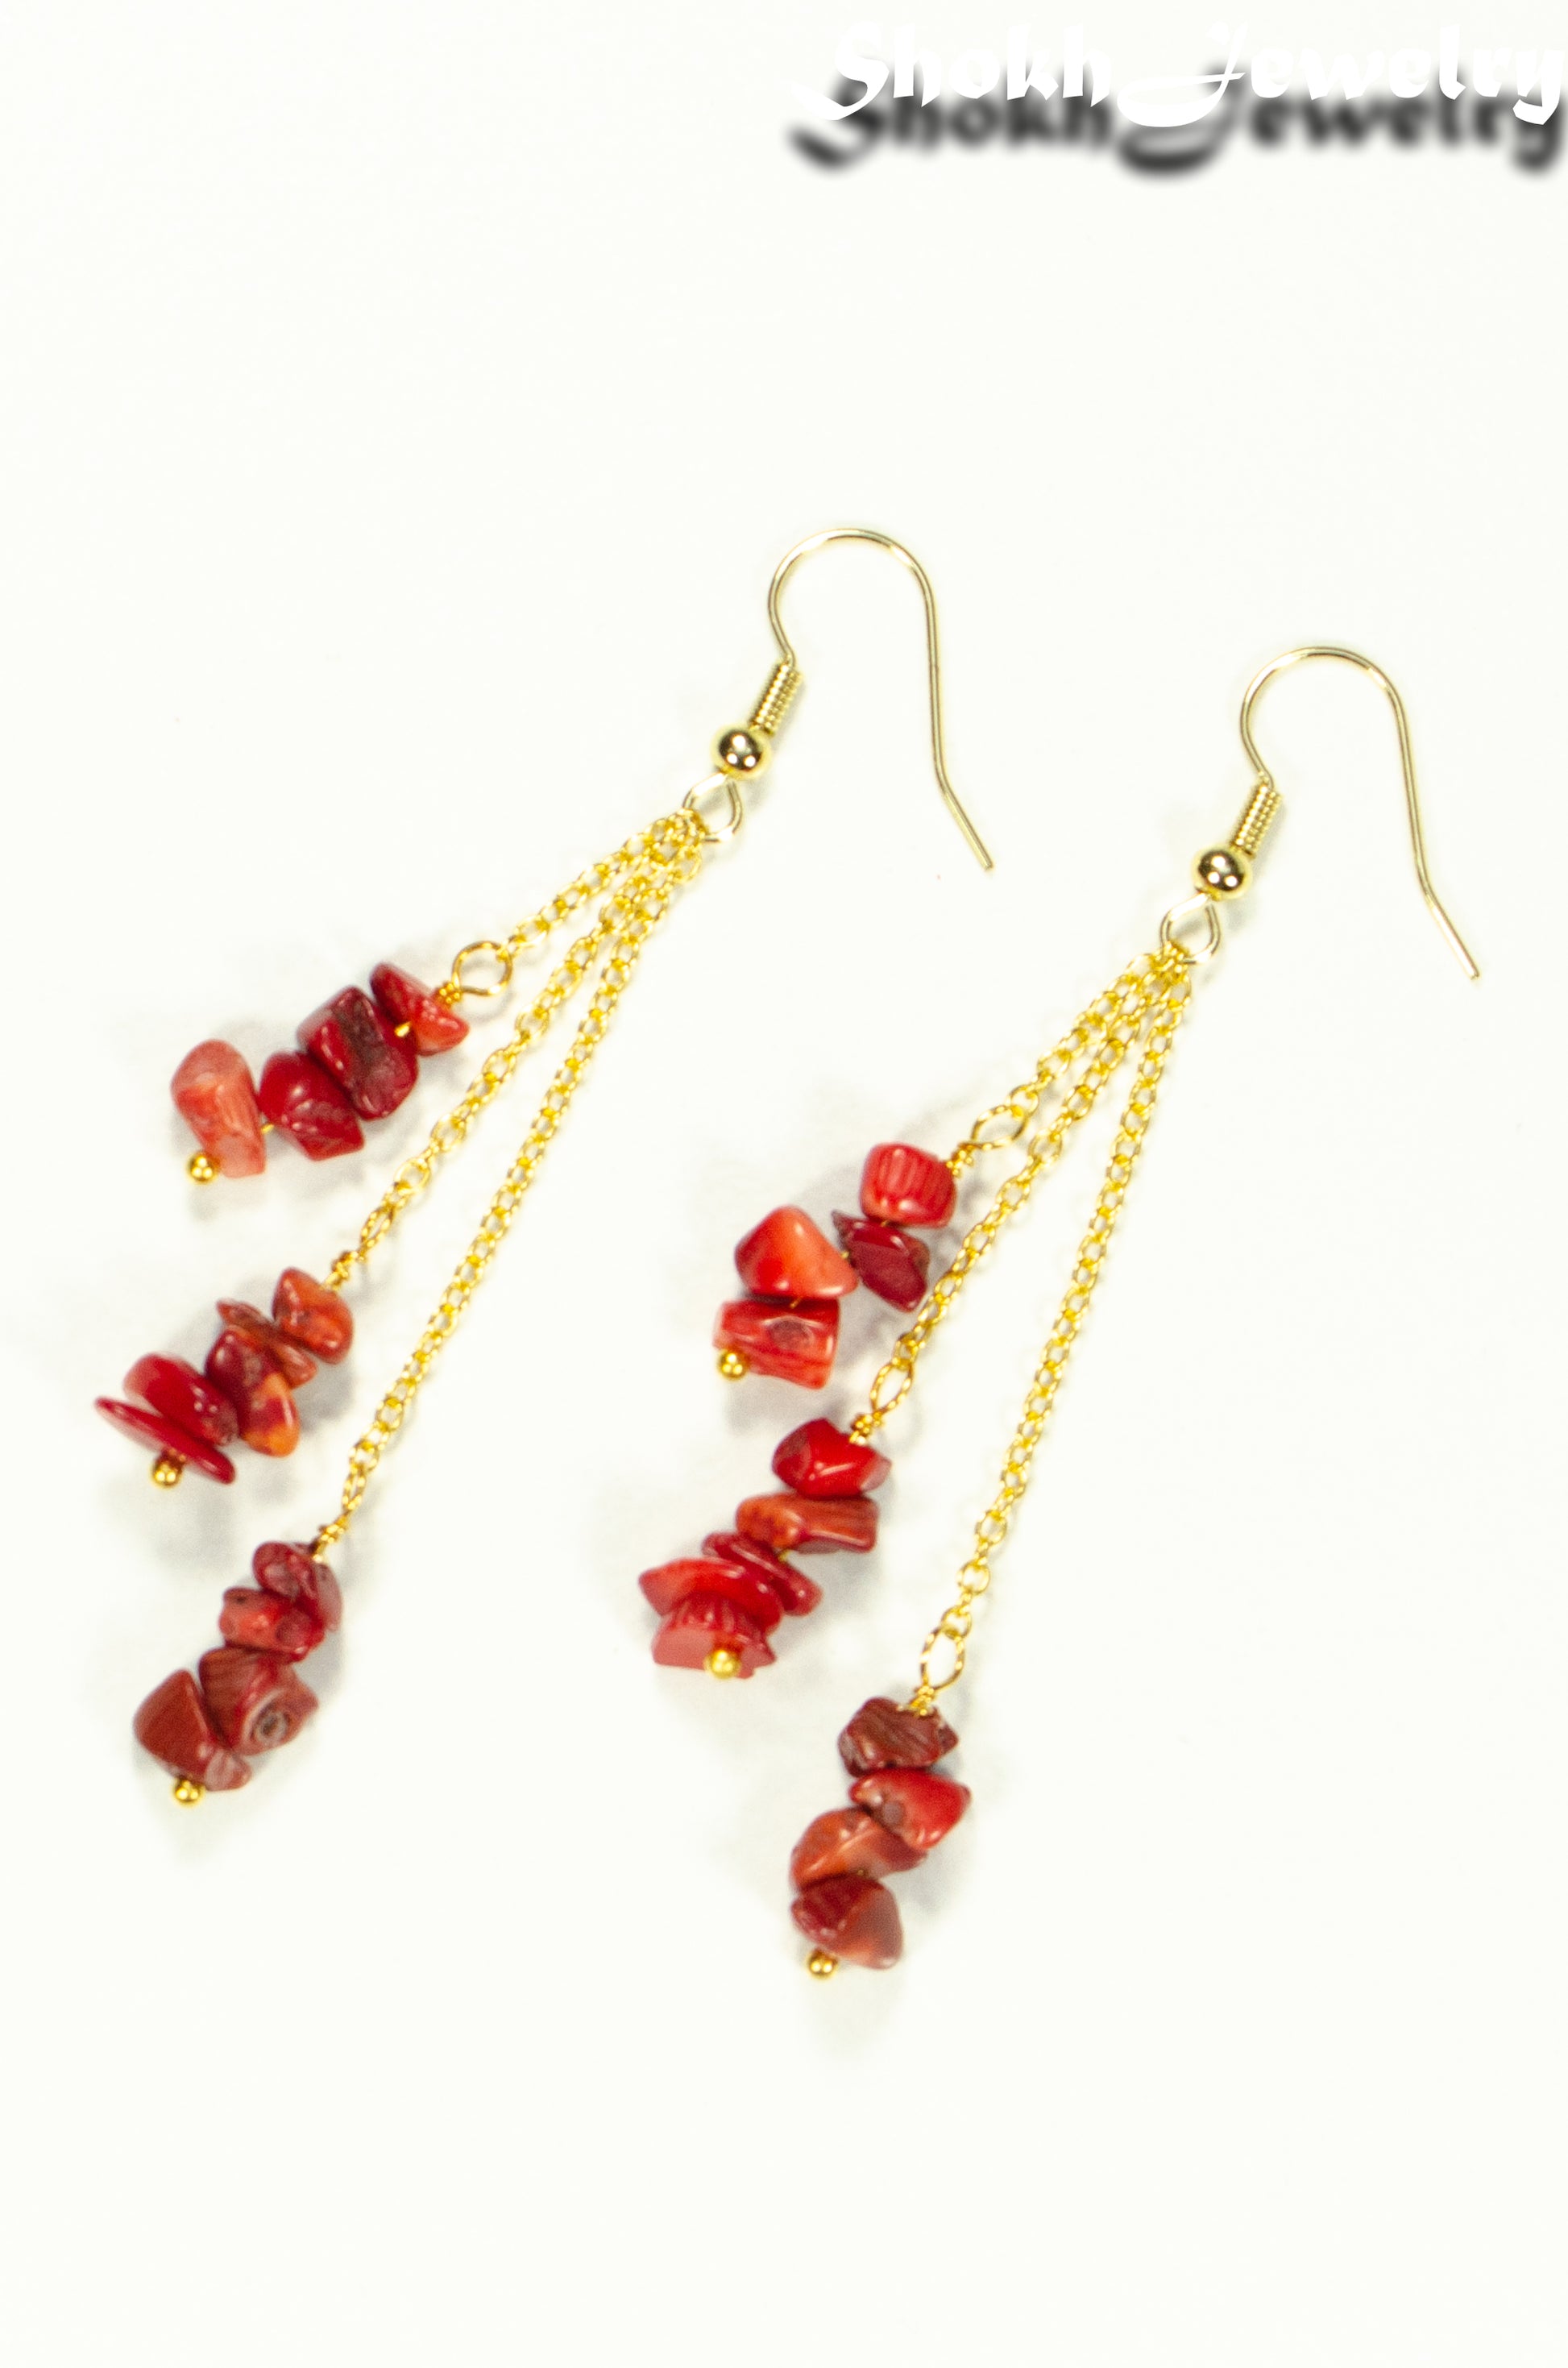 Top view of Long Gold Plated Chain and Red Dyed Bamboo Coral Chip Earrings.